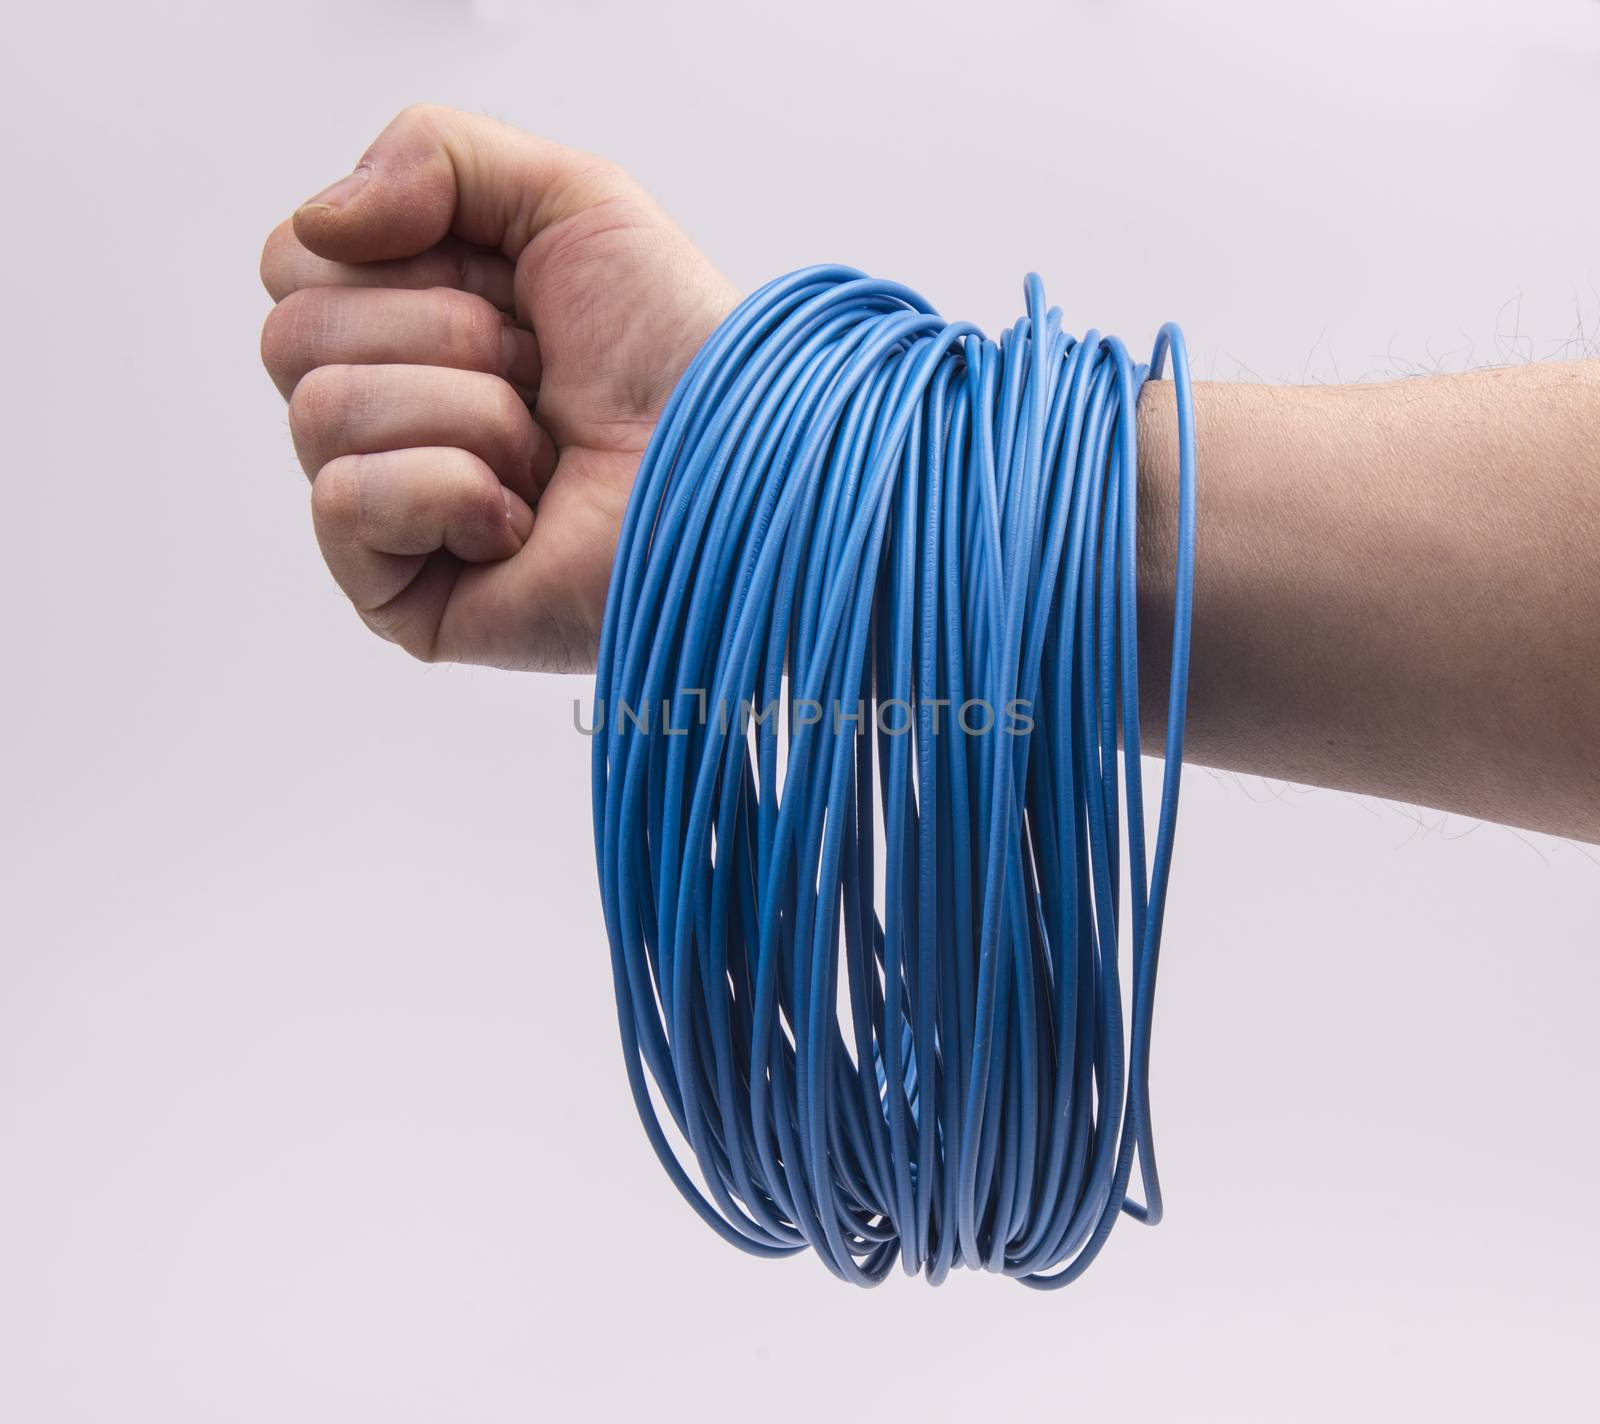 a skein of colored electric wire in the hand